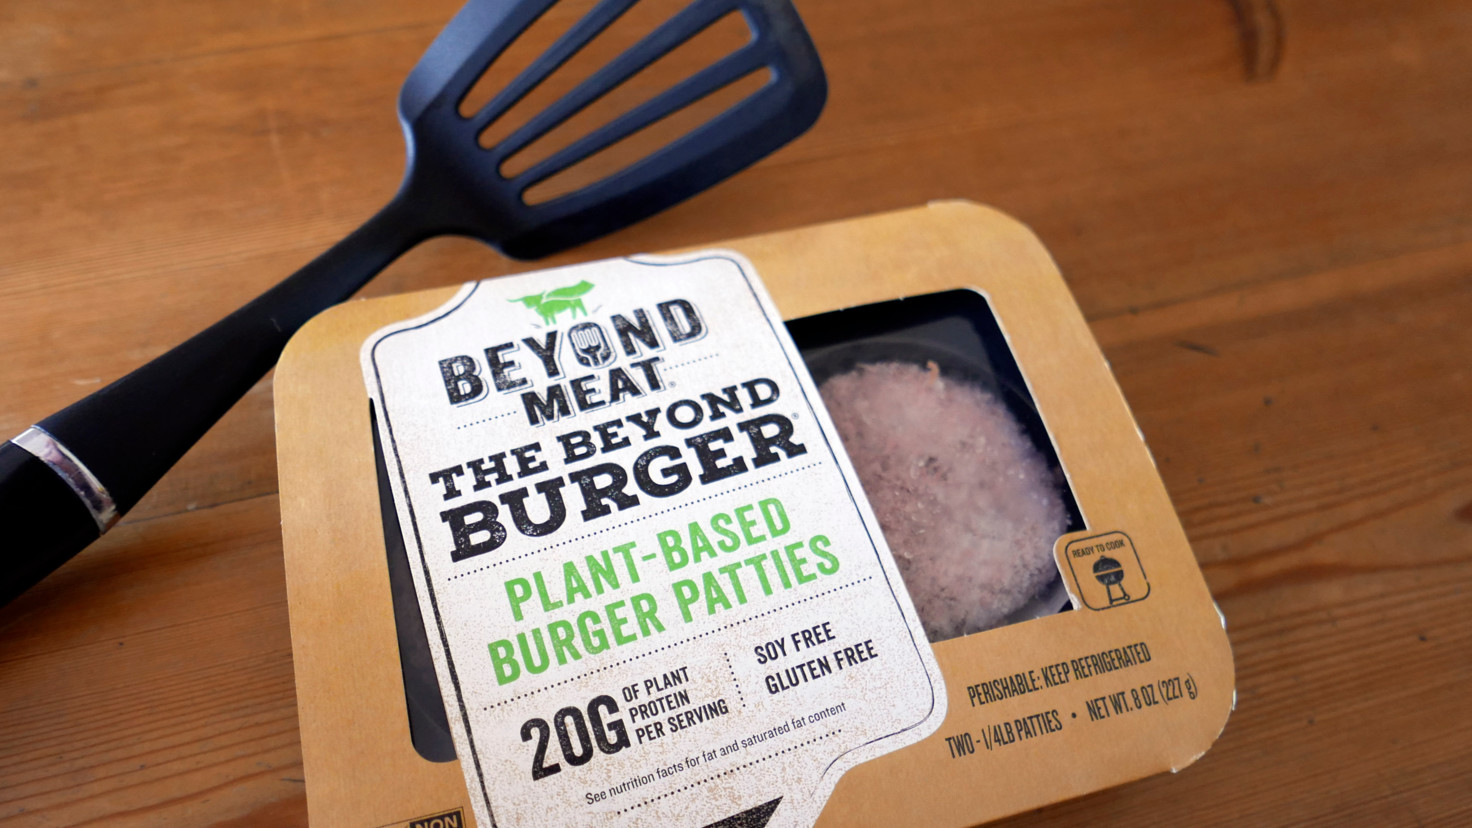 Beyond Meat burger in a box